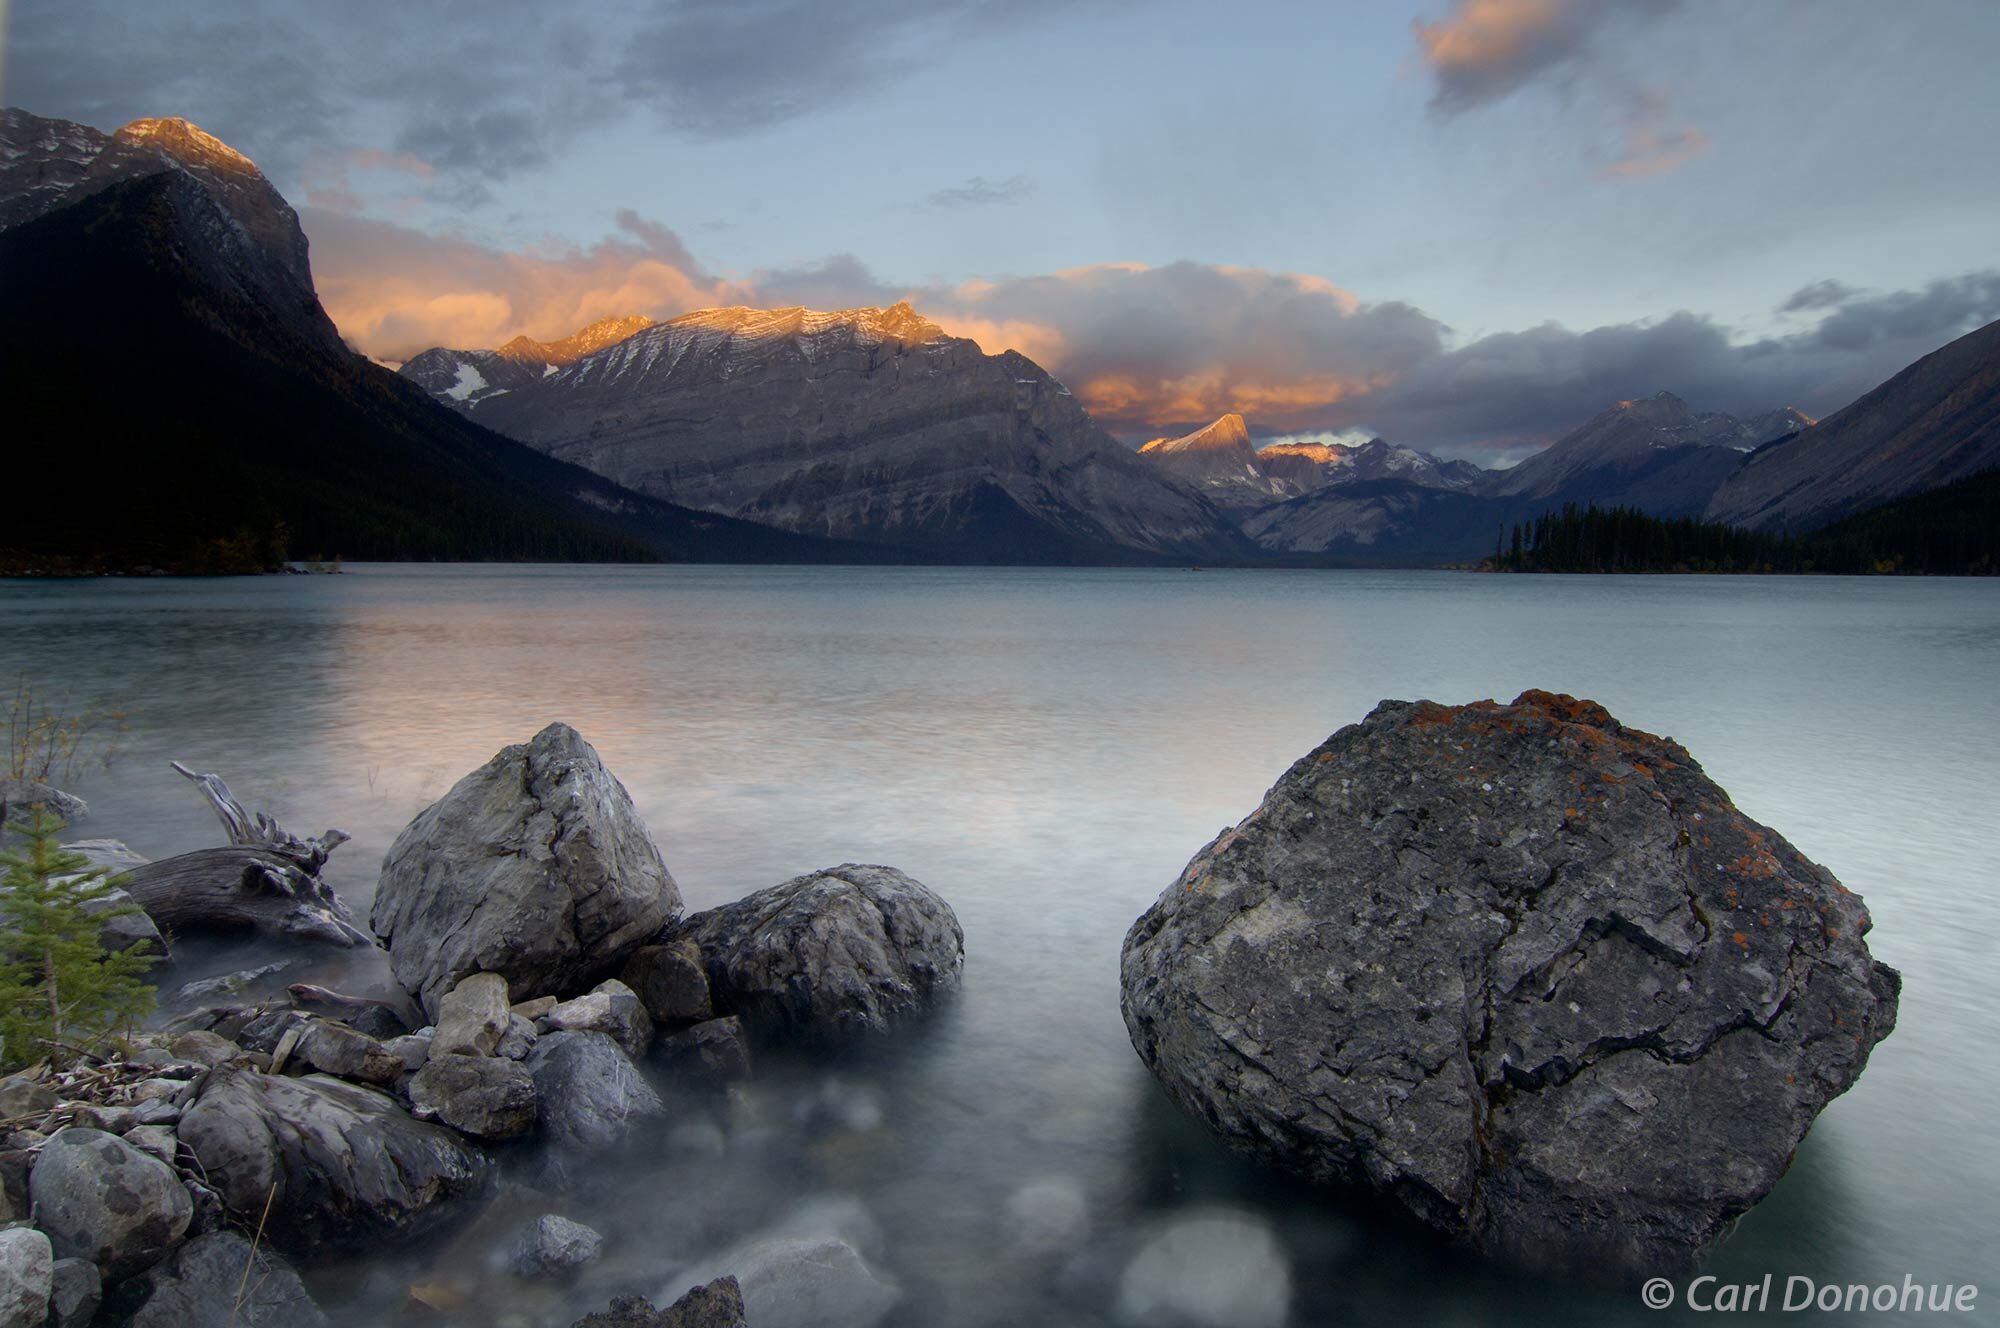 Dawn over Upper Kananaskis Lake. The first light of the day touches the highest peaks of the Canadian Rockies in Kananaskis Country...